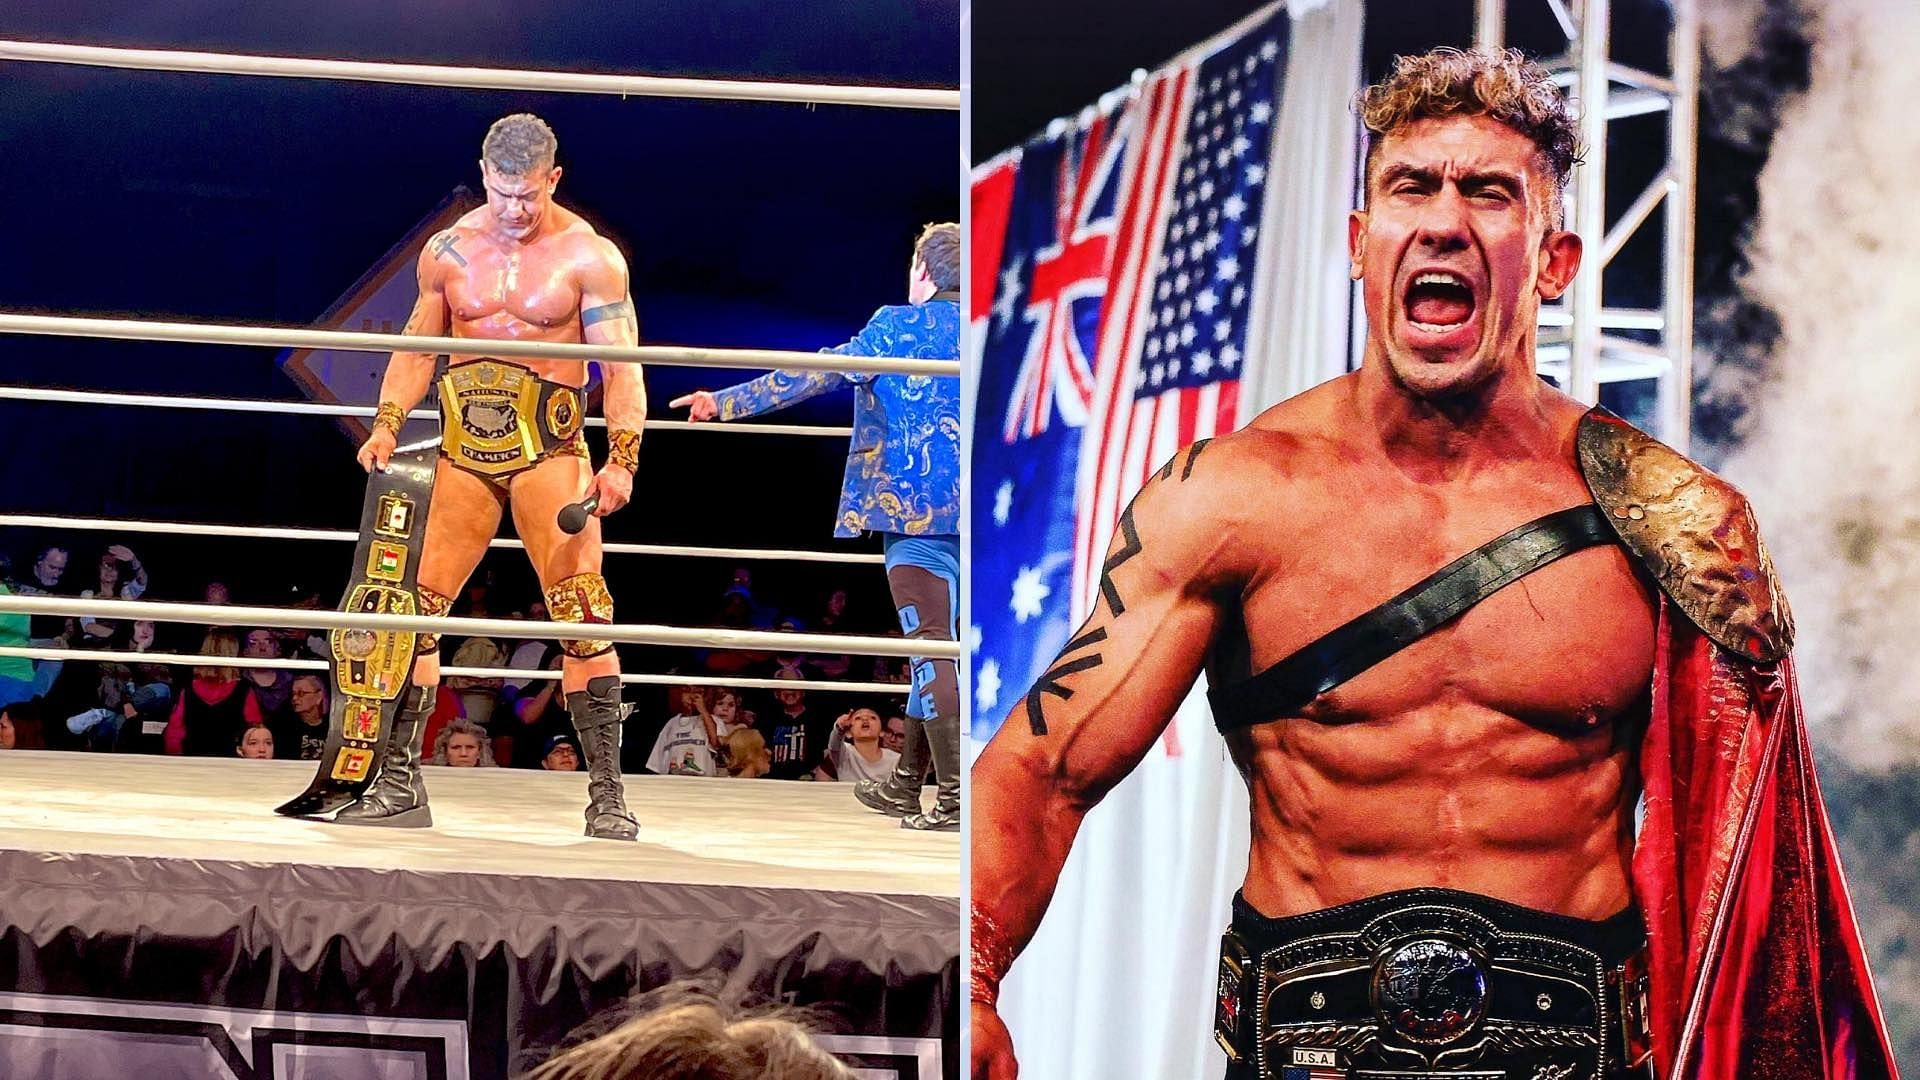 EC3 was previously a member of the WWE roster